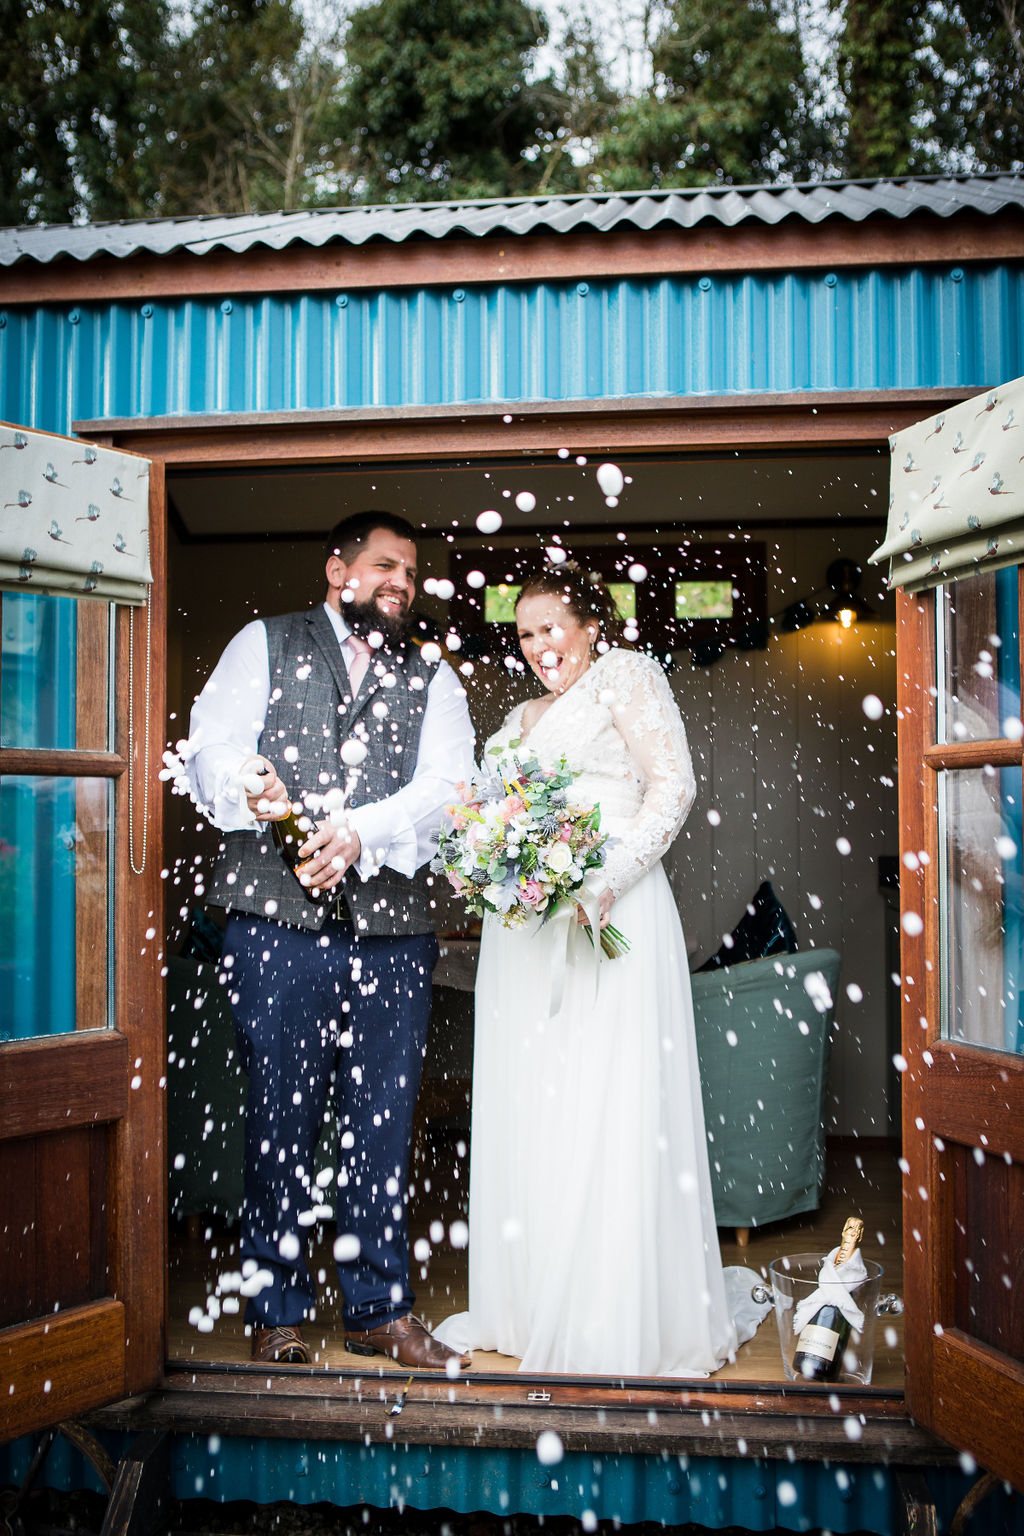 A bride and groom celebrating their wedding with a shower of confetti